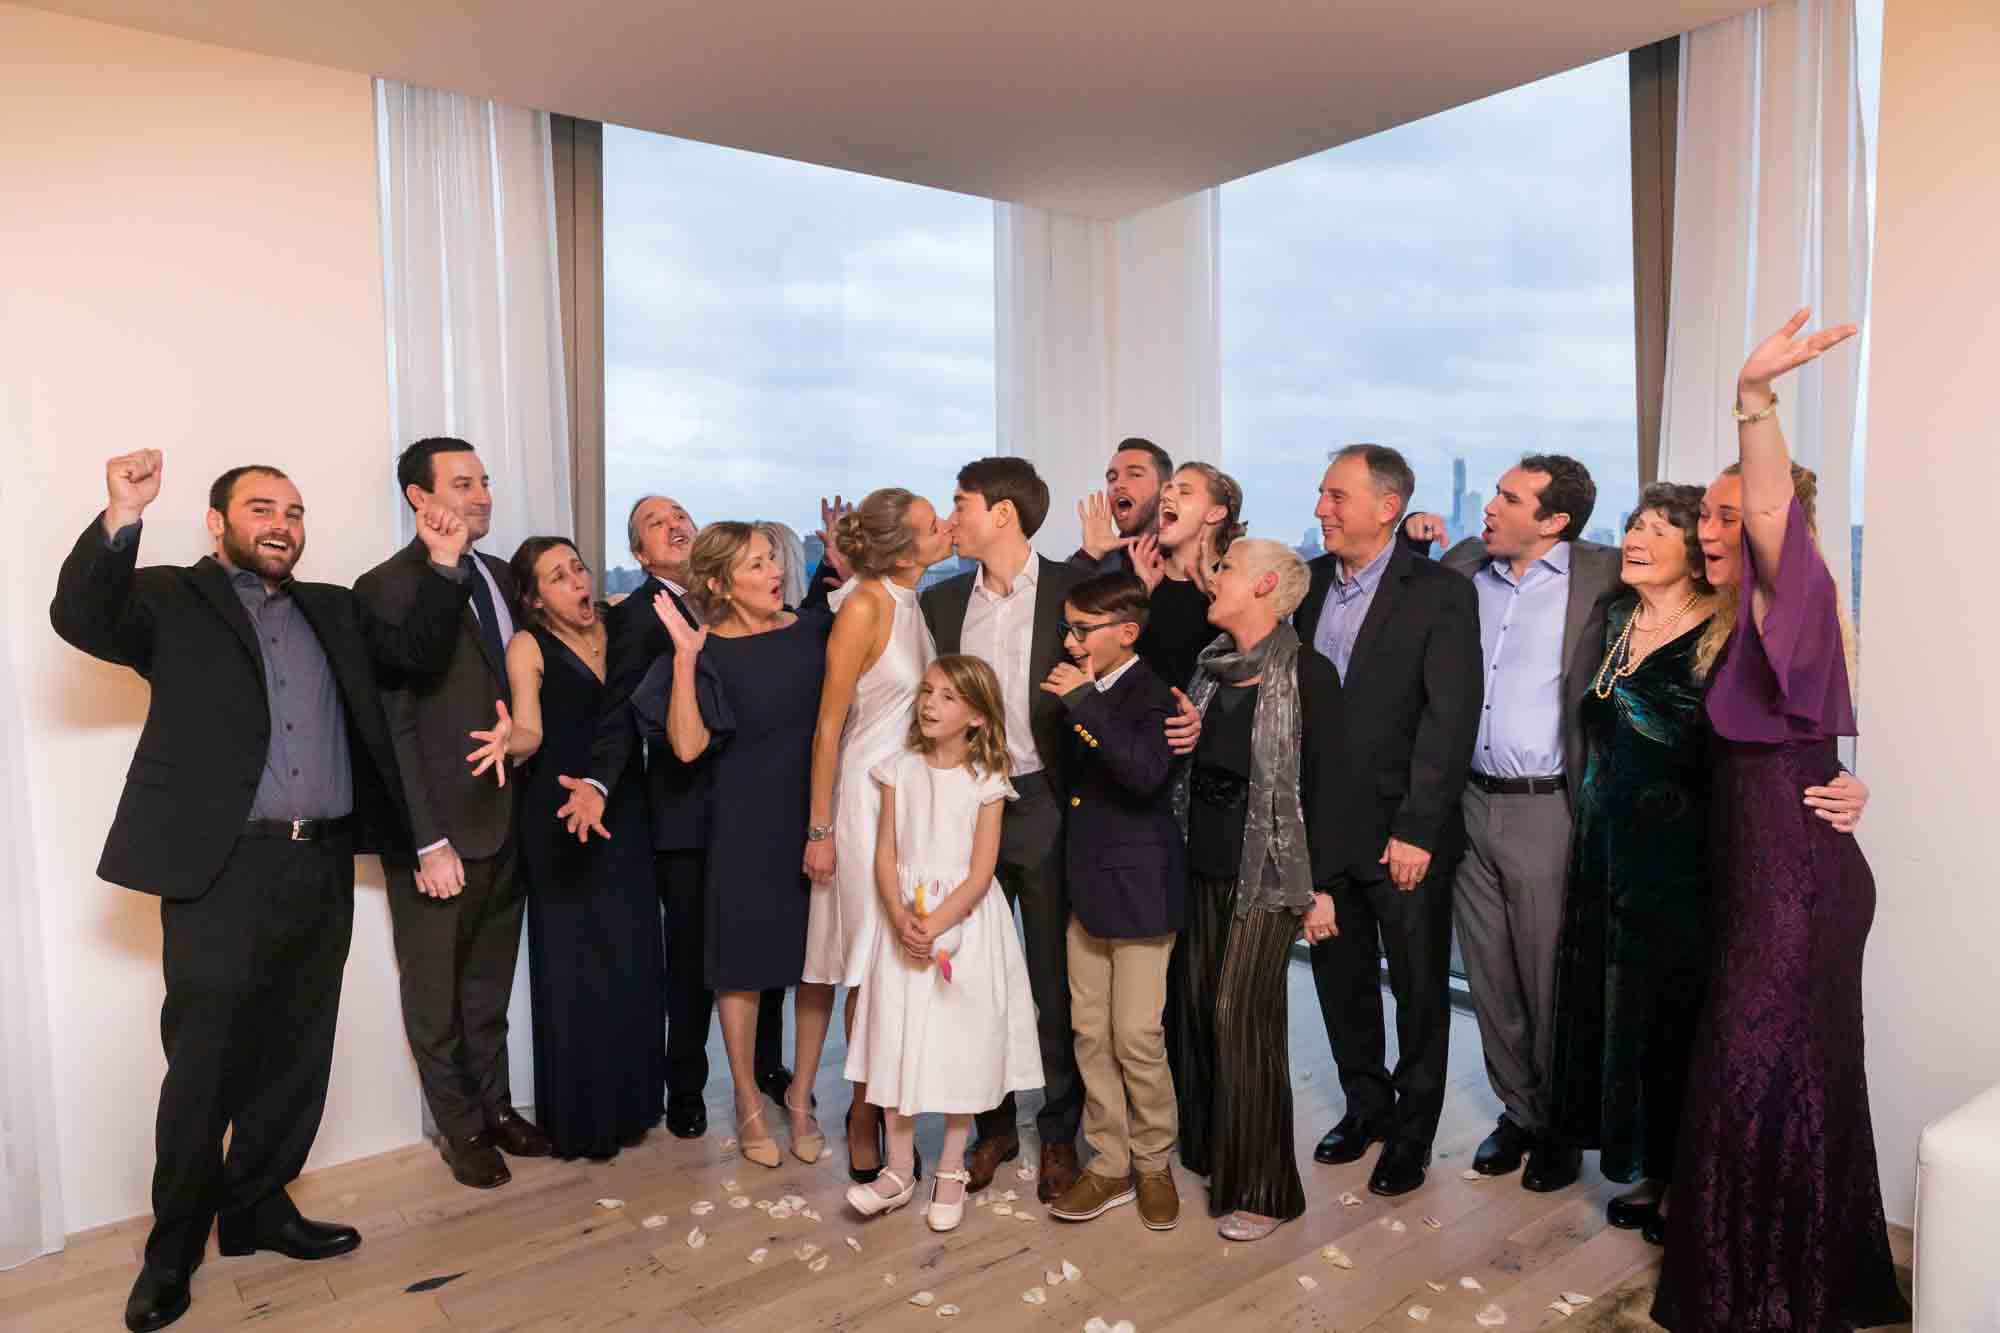 Family portrait with guests cheering as bride and groom kiss